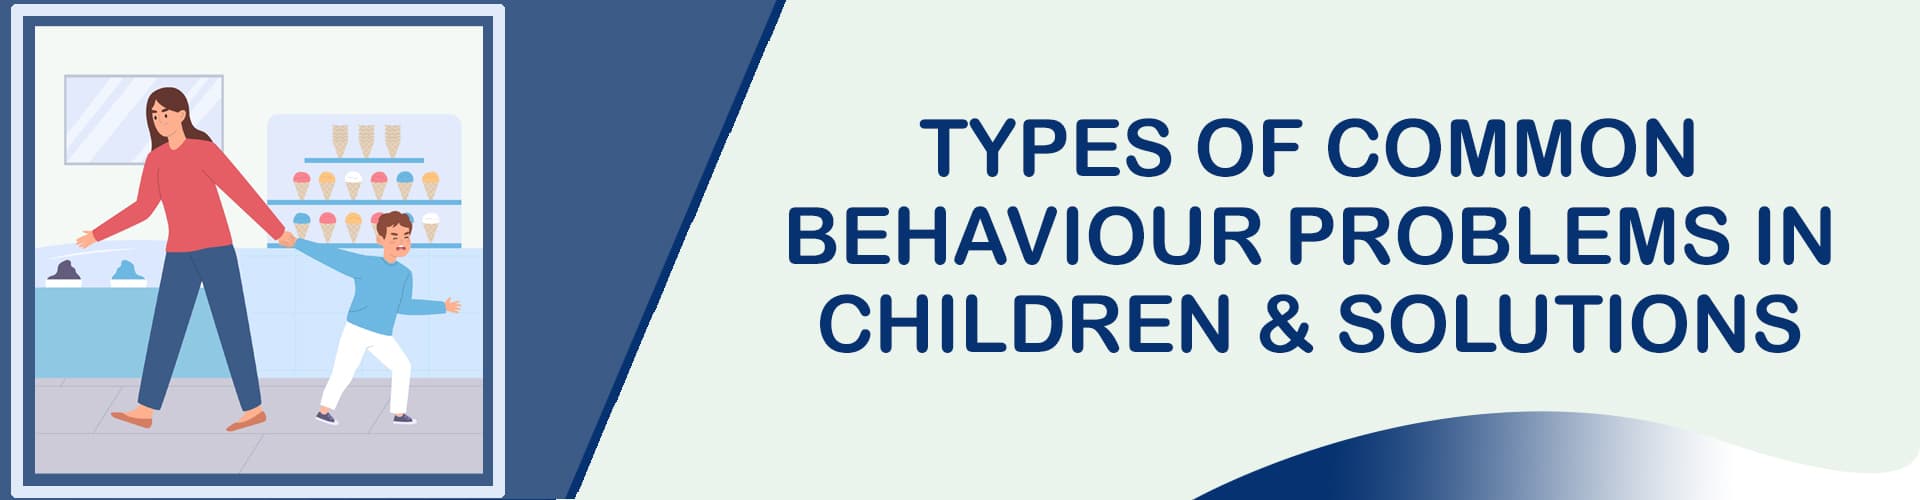 Types of Common Behavioral Problems in Children and Solutions